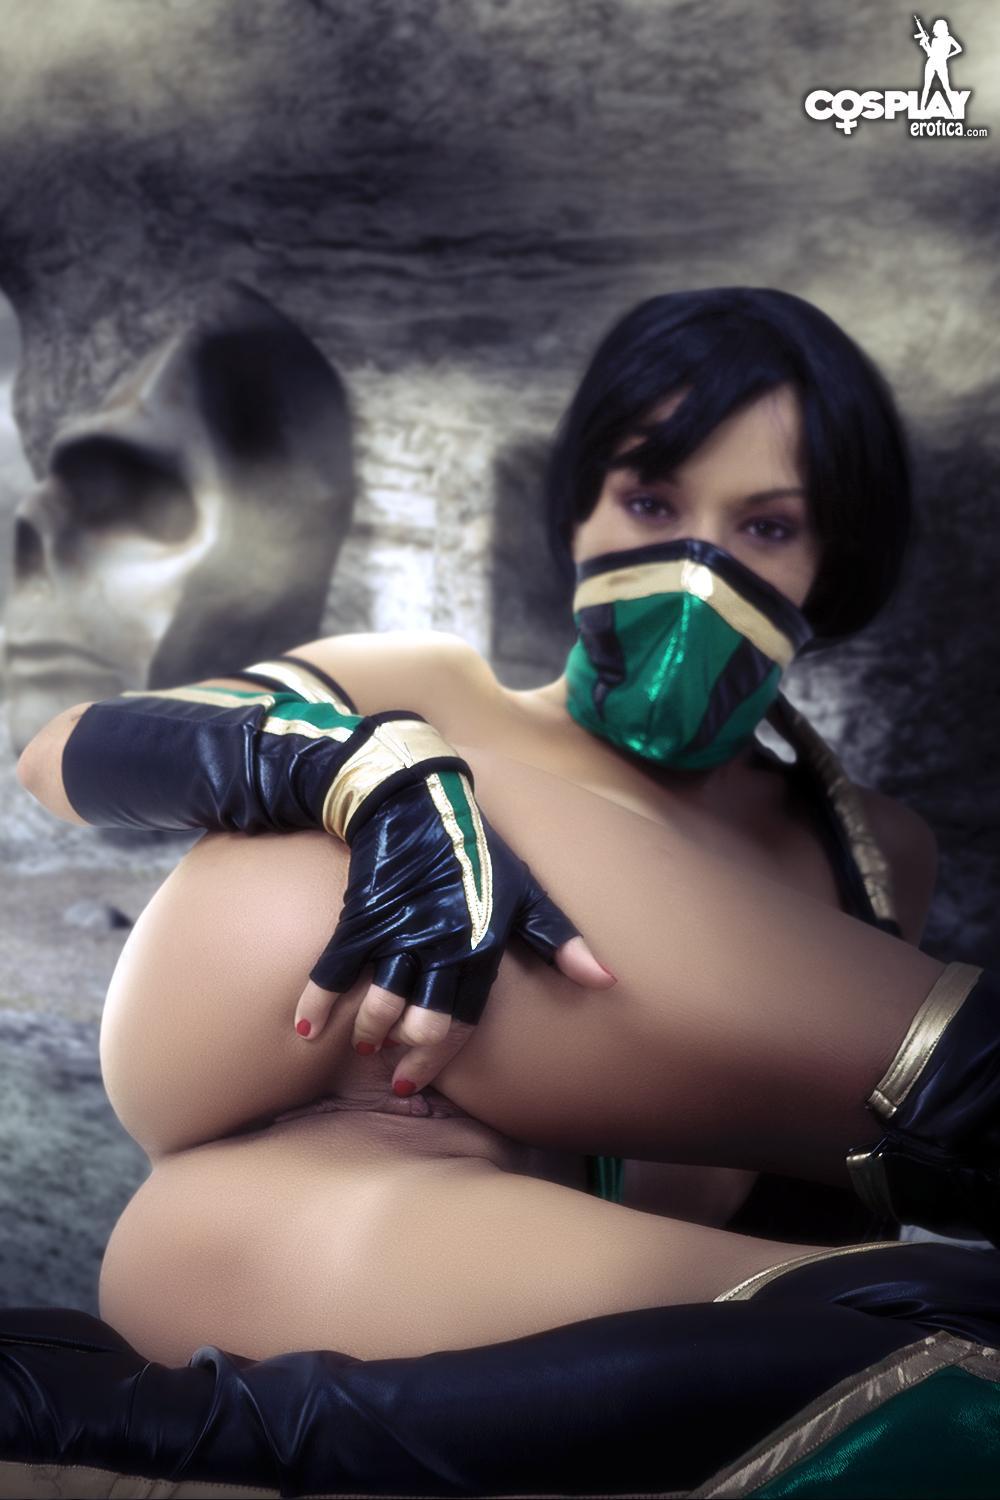 Cosplay babe Brownie dresses as a super hot Jade from Mortal Kombat #53563712